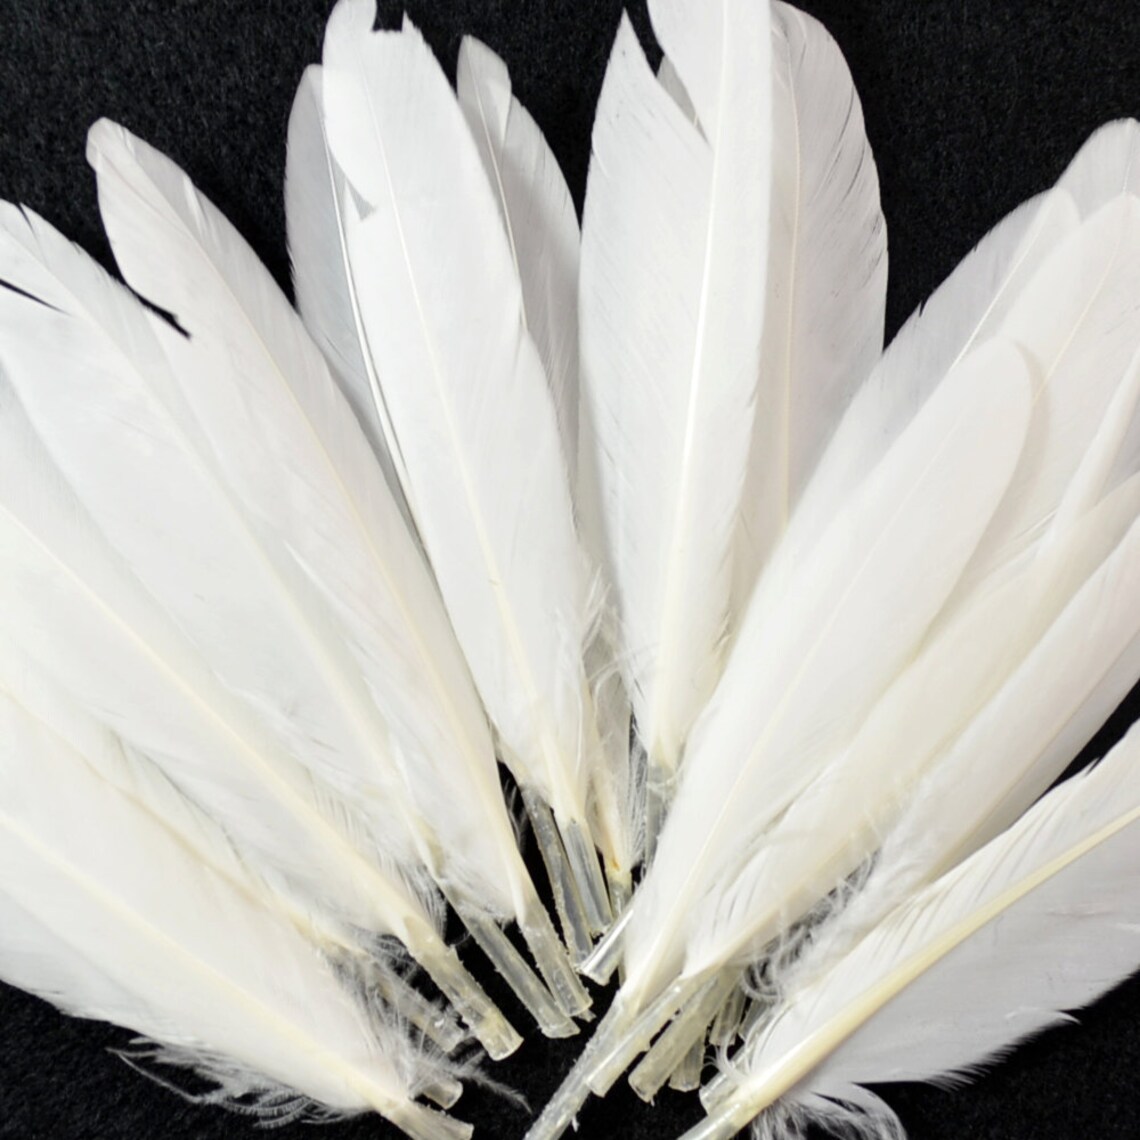 24pcs Small Duck Quills Stiff Loose Feathers-white - Etsy